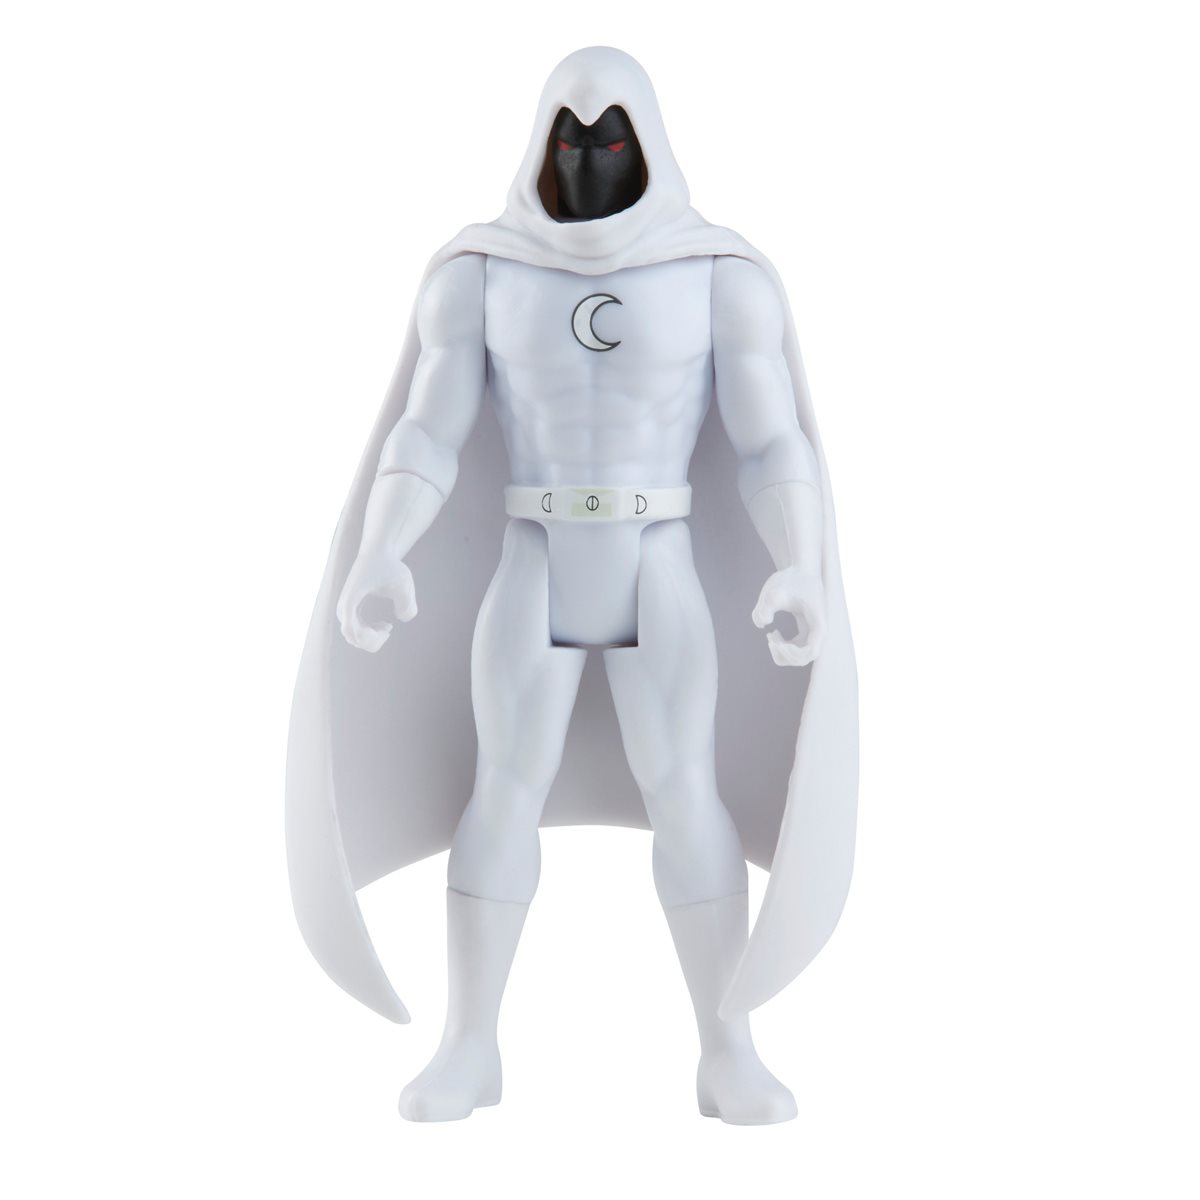 Avengers 2022 Marvel Legends Moon Knight 6-Inch Action Figure